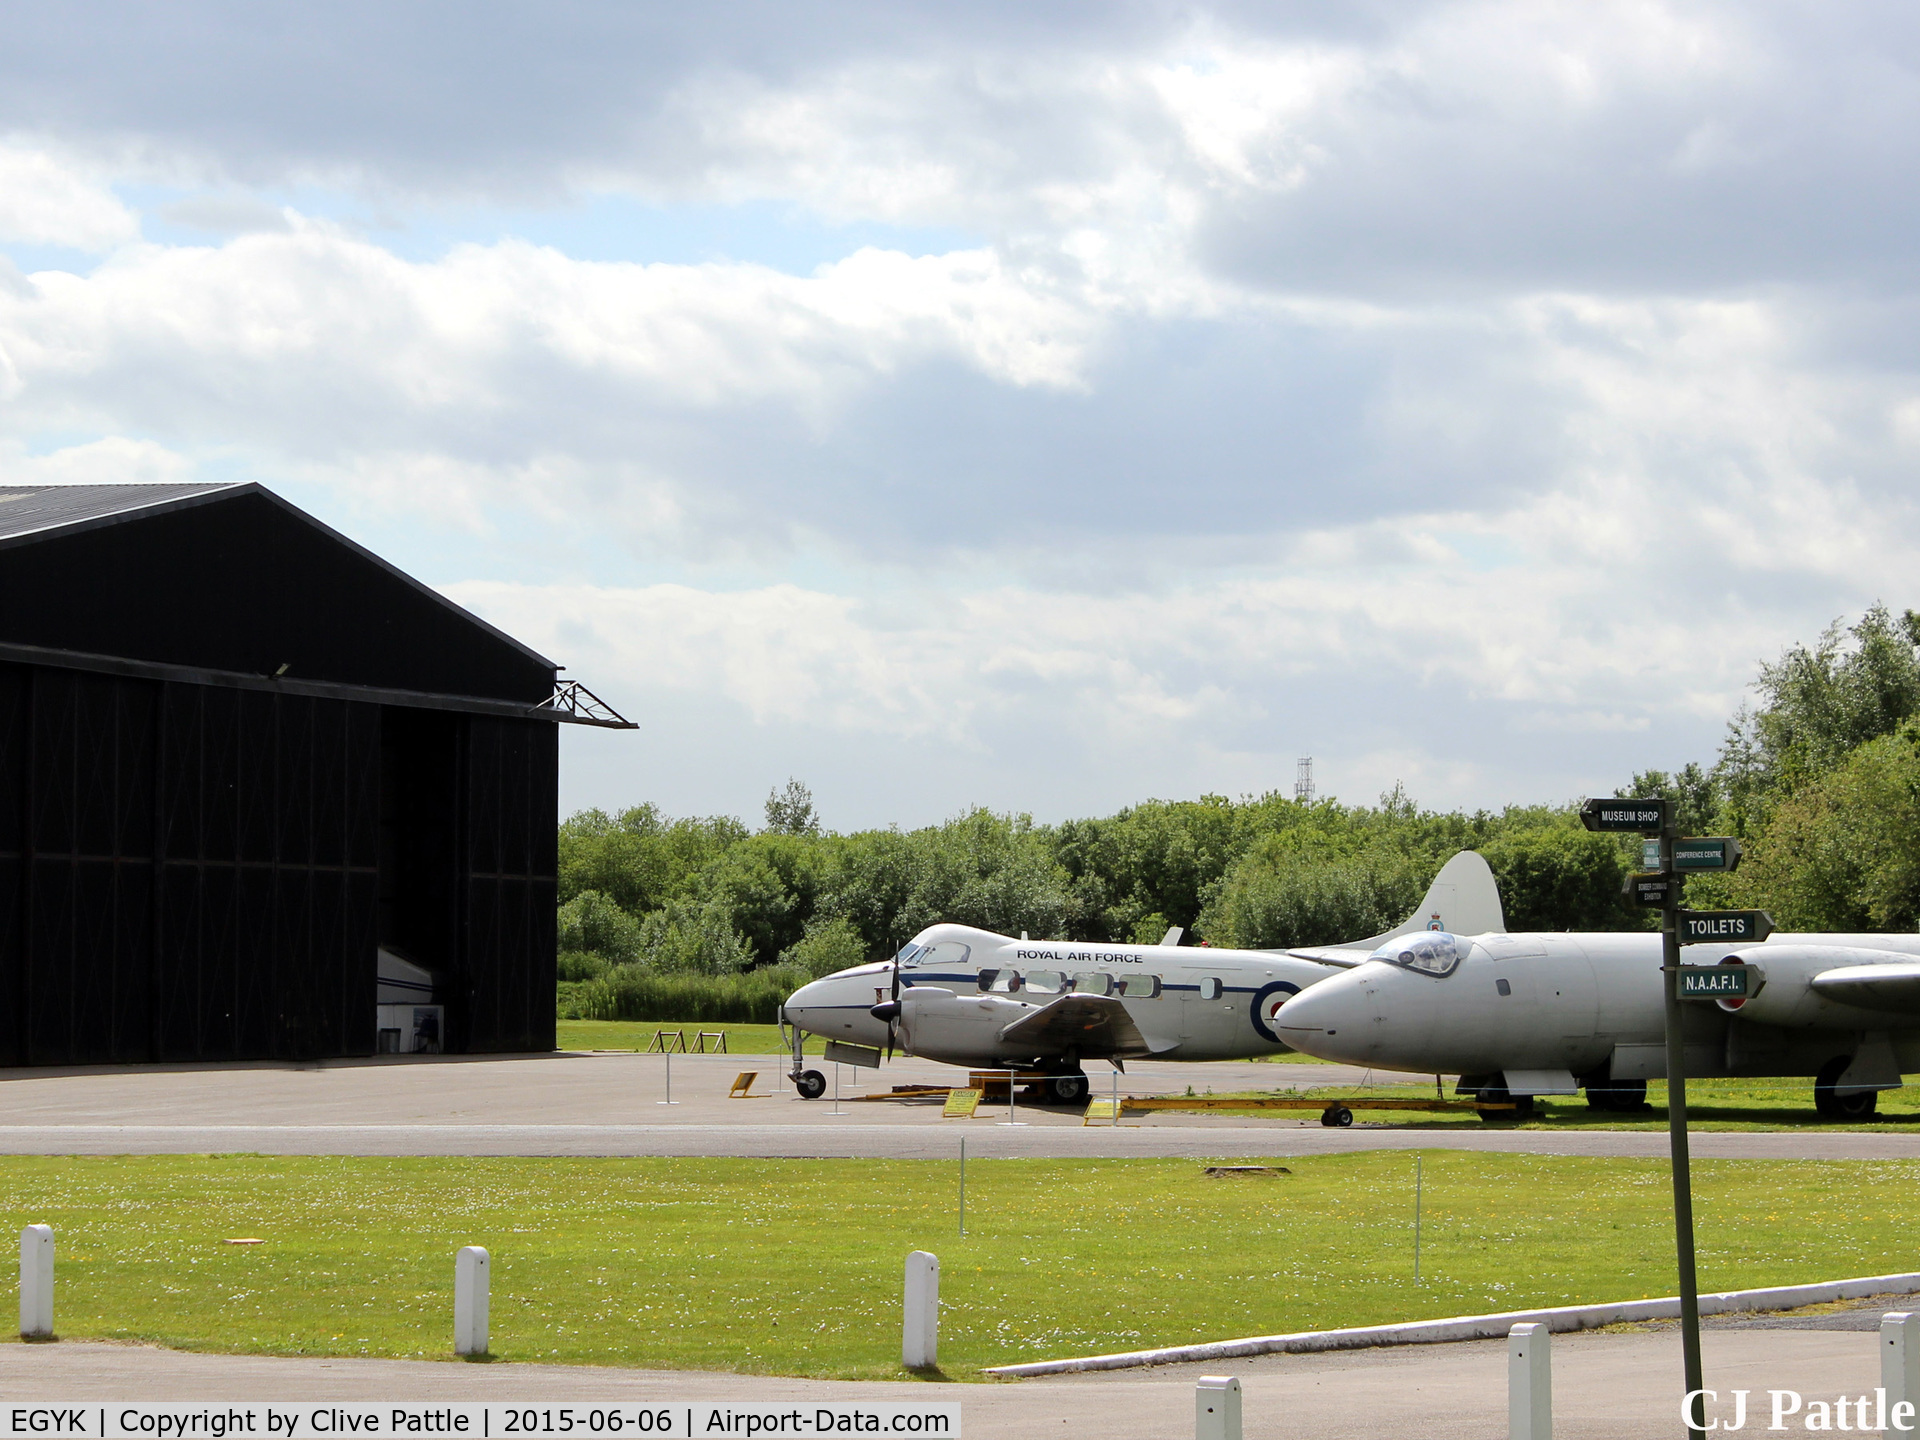 EGYK Airport - External display and hangar at the Yorkshire Aviation Museum, Elvington. Parked up are a DH Devon and a Canberra.